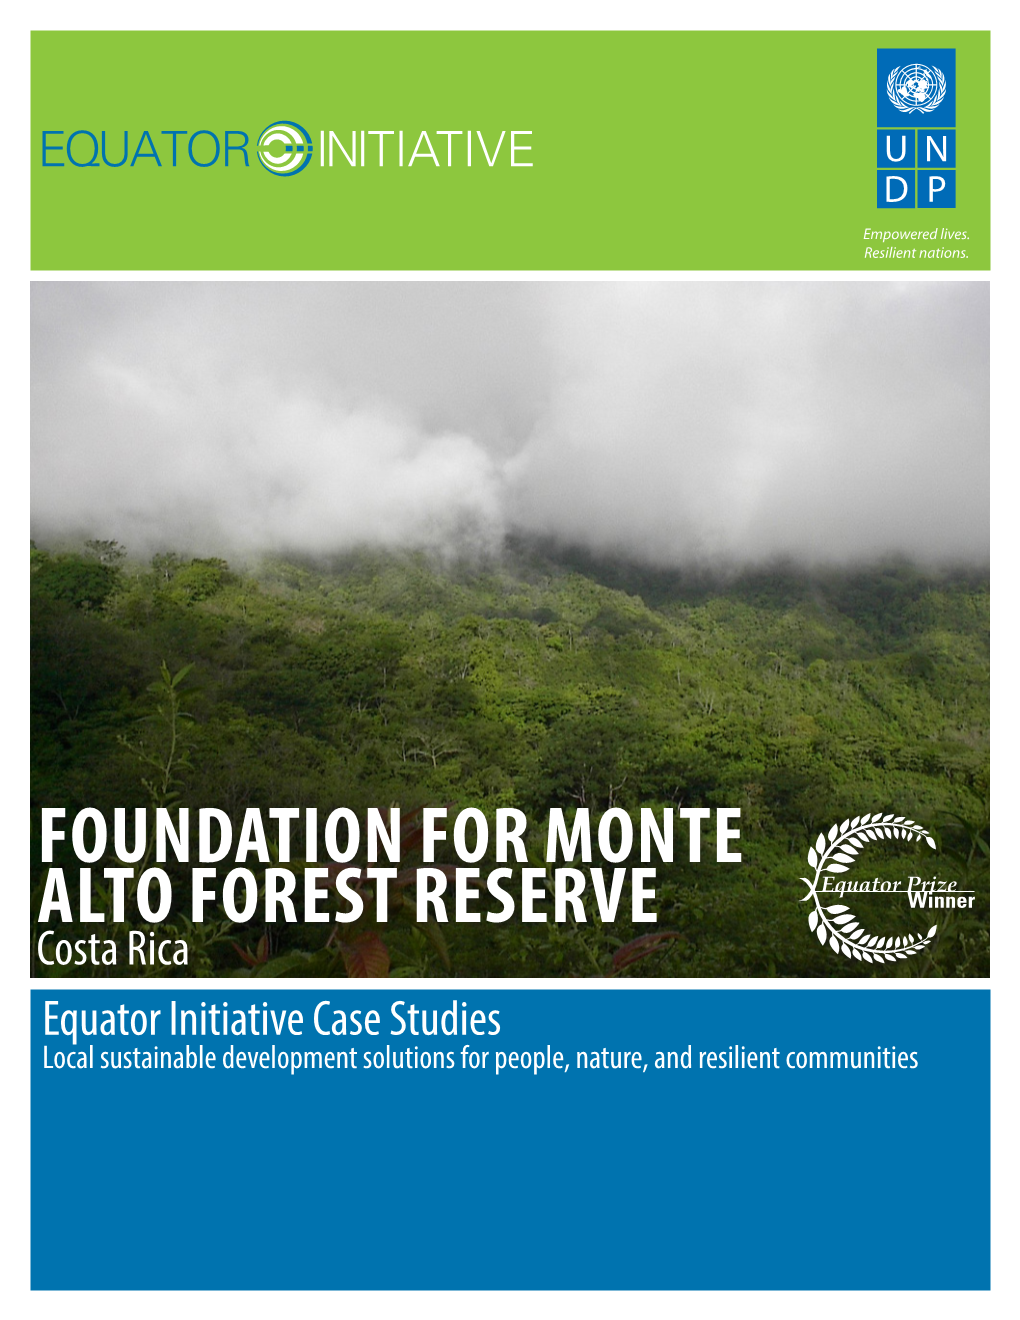 Foundation for Monte Alto Forest Reserve